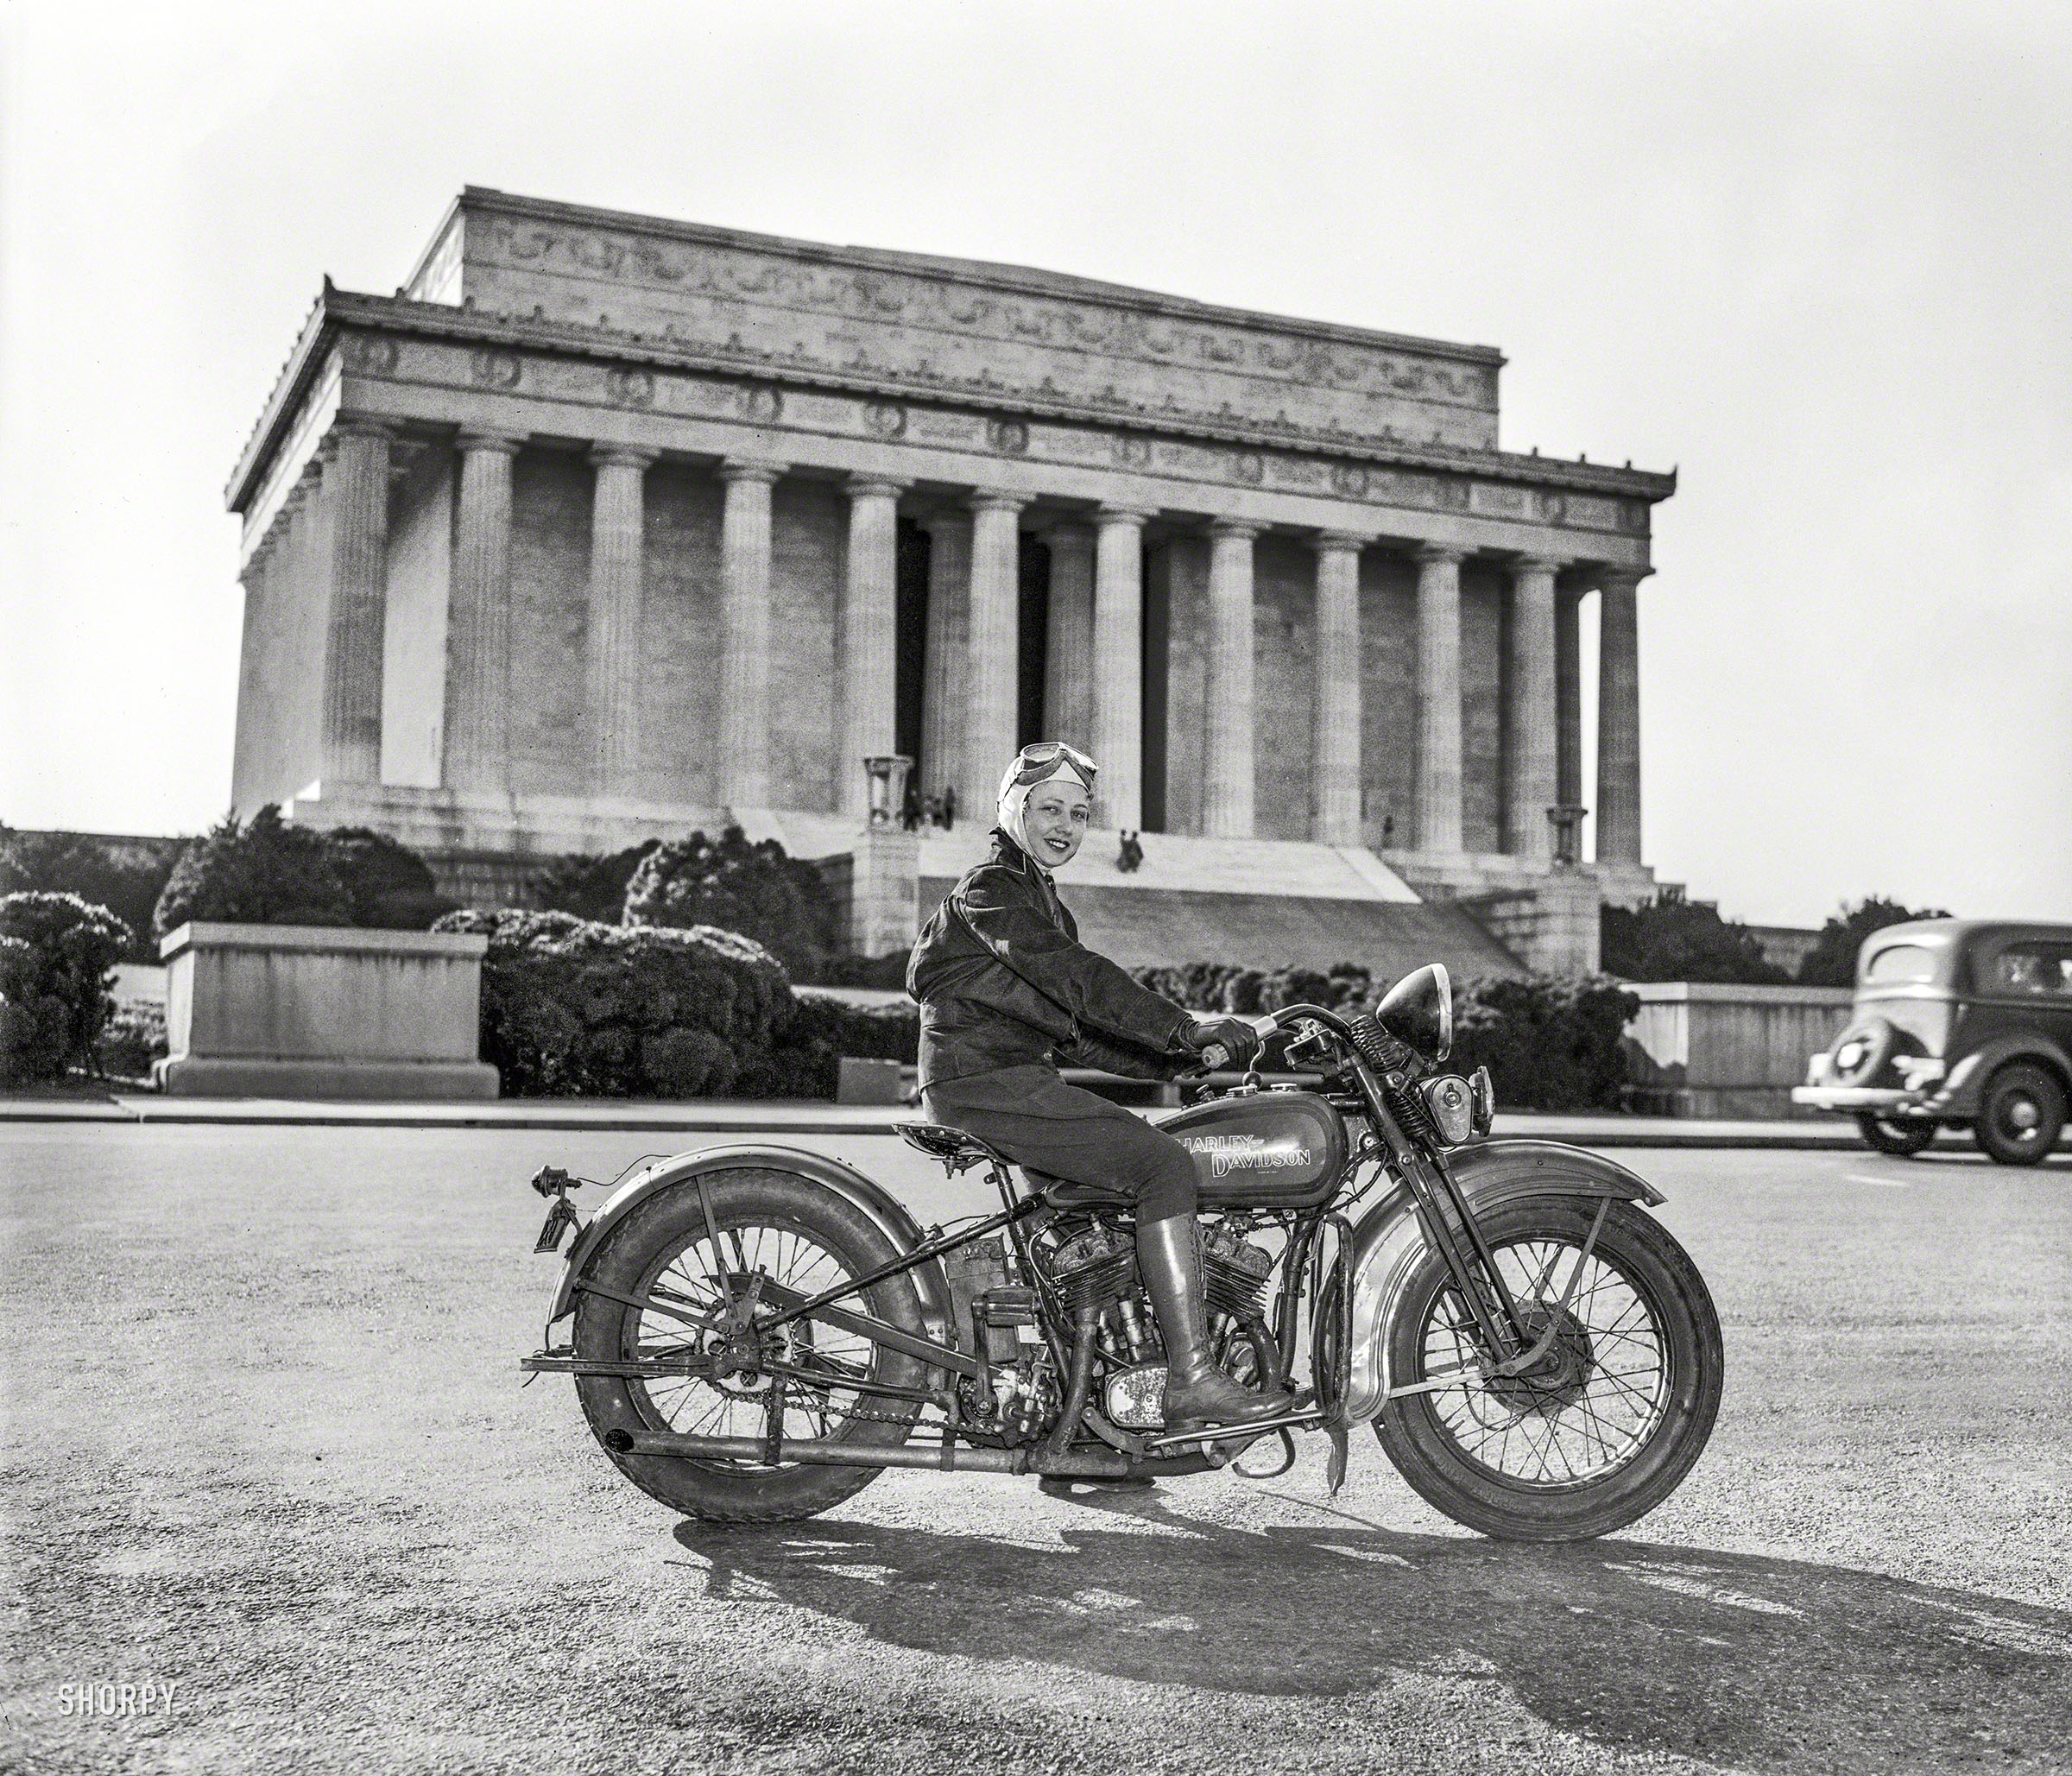 Sept. 15, 1937. "Although she weighs only 88 pounds -- one-third of the machine she rides -- Mrs. Sally Halterman is the first woman to be granted a license to operate a motorcycle in the District of Columbia. She is 27 years old and 4 feet, 11 inches tall. Immediately after receiving her permit, Mrs. Halterman was initiated into the D.C. Motorcycle Club -- the only girl ever to be accorded this honor." Harris & Ewing Collection glass negative. View full size.